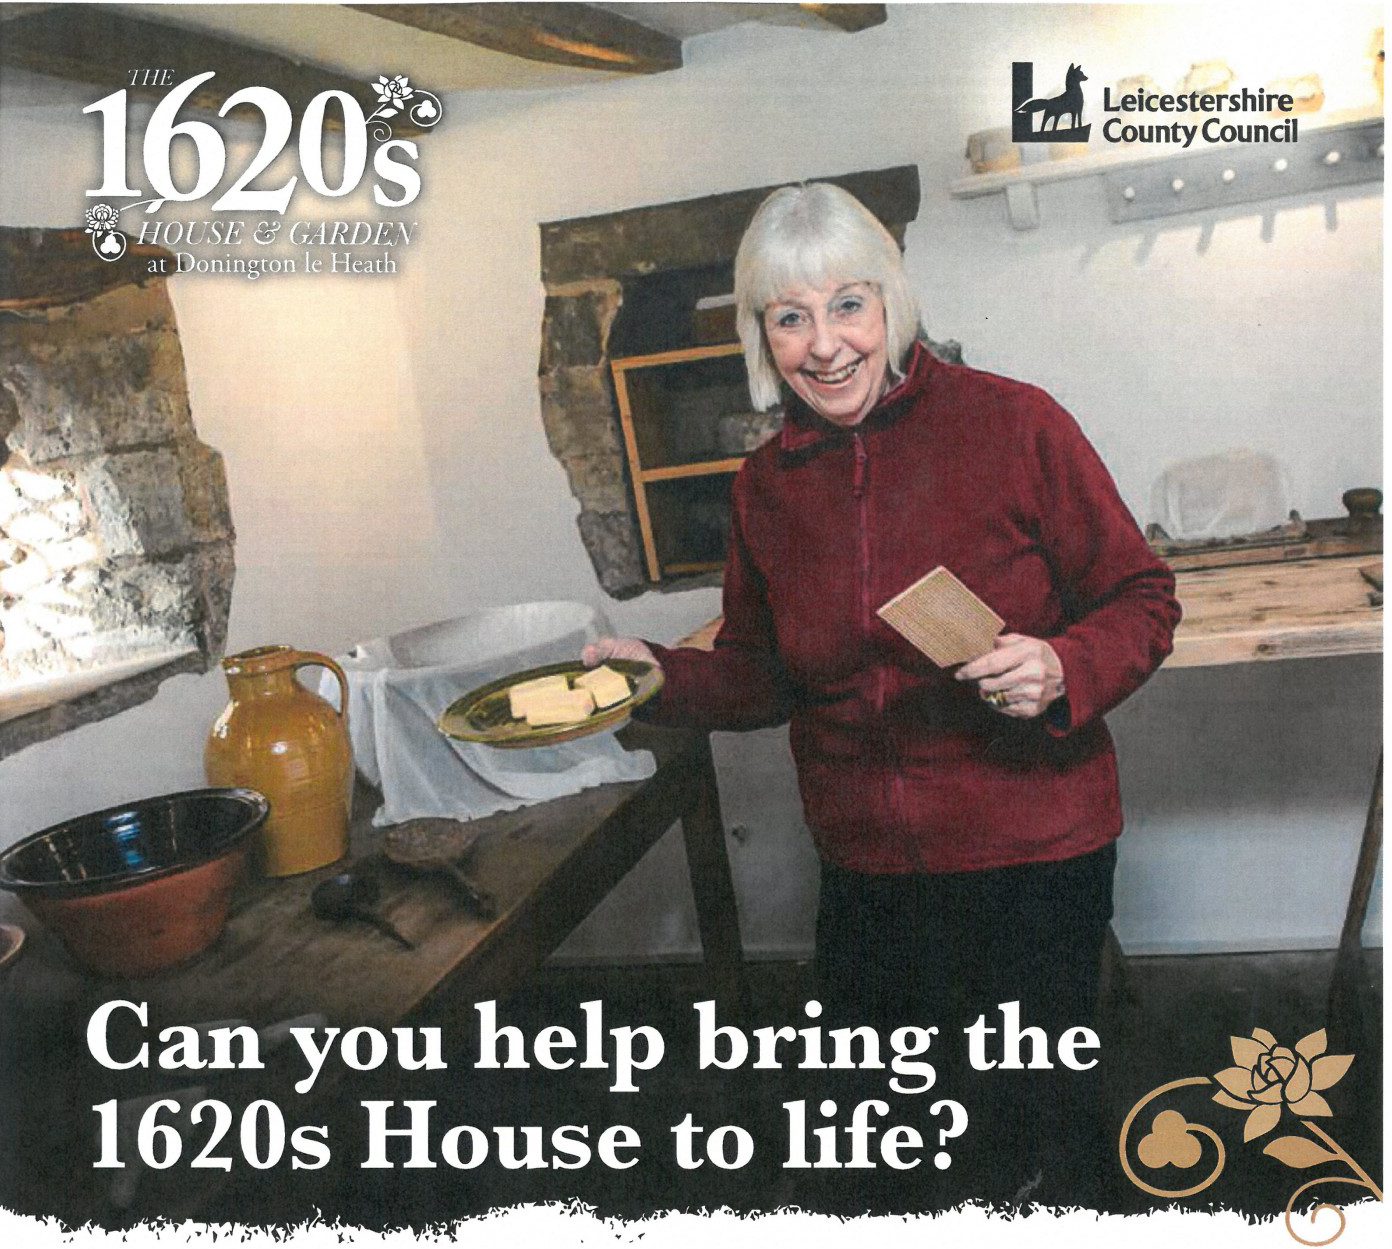 Become a 1620s House Volunteer - Open Day